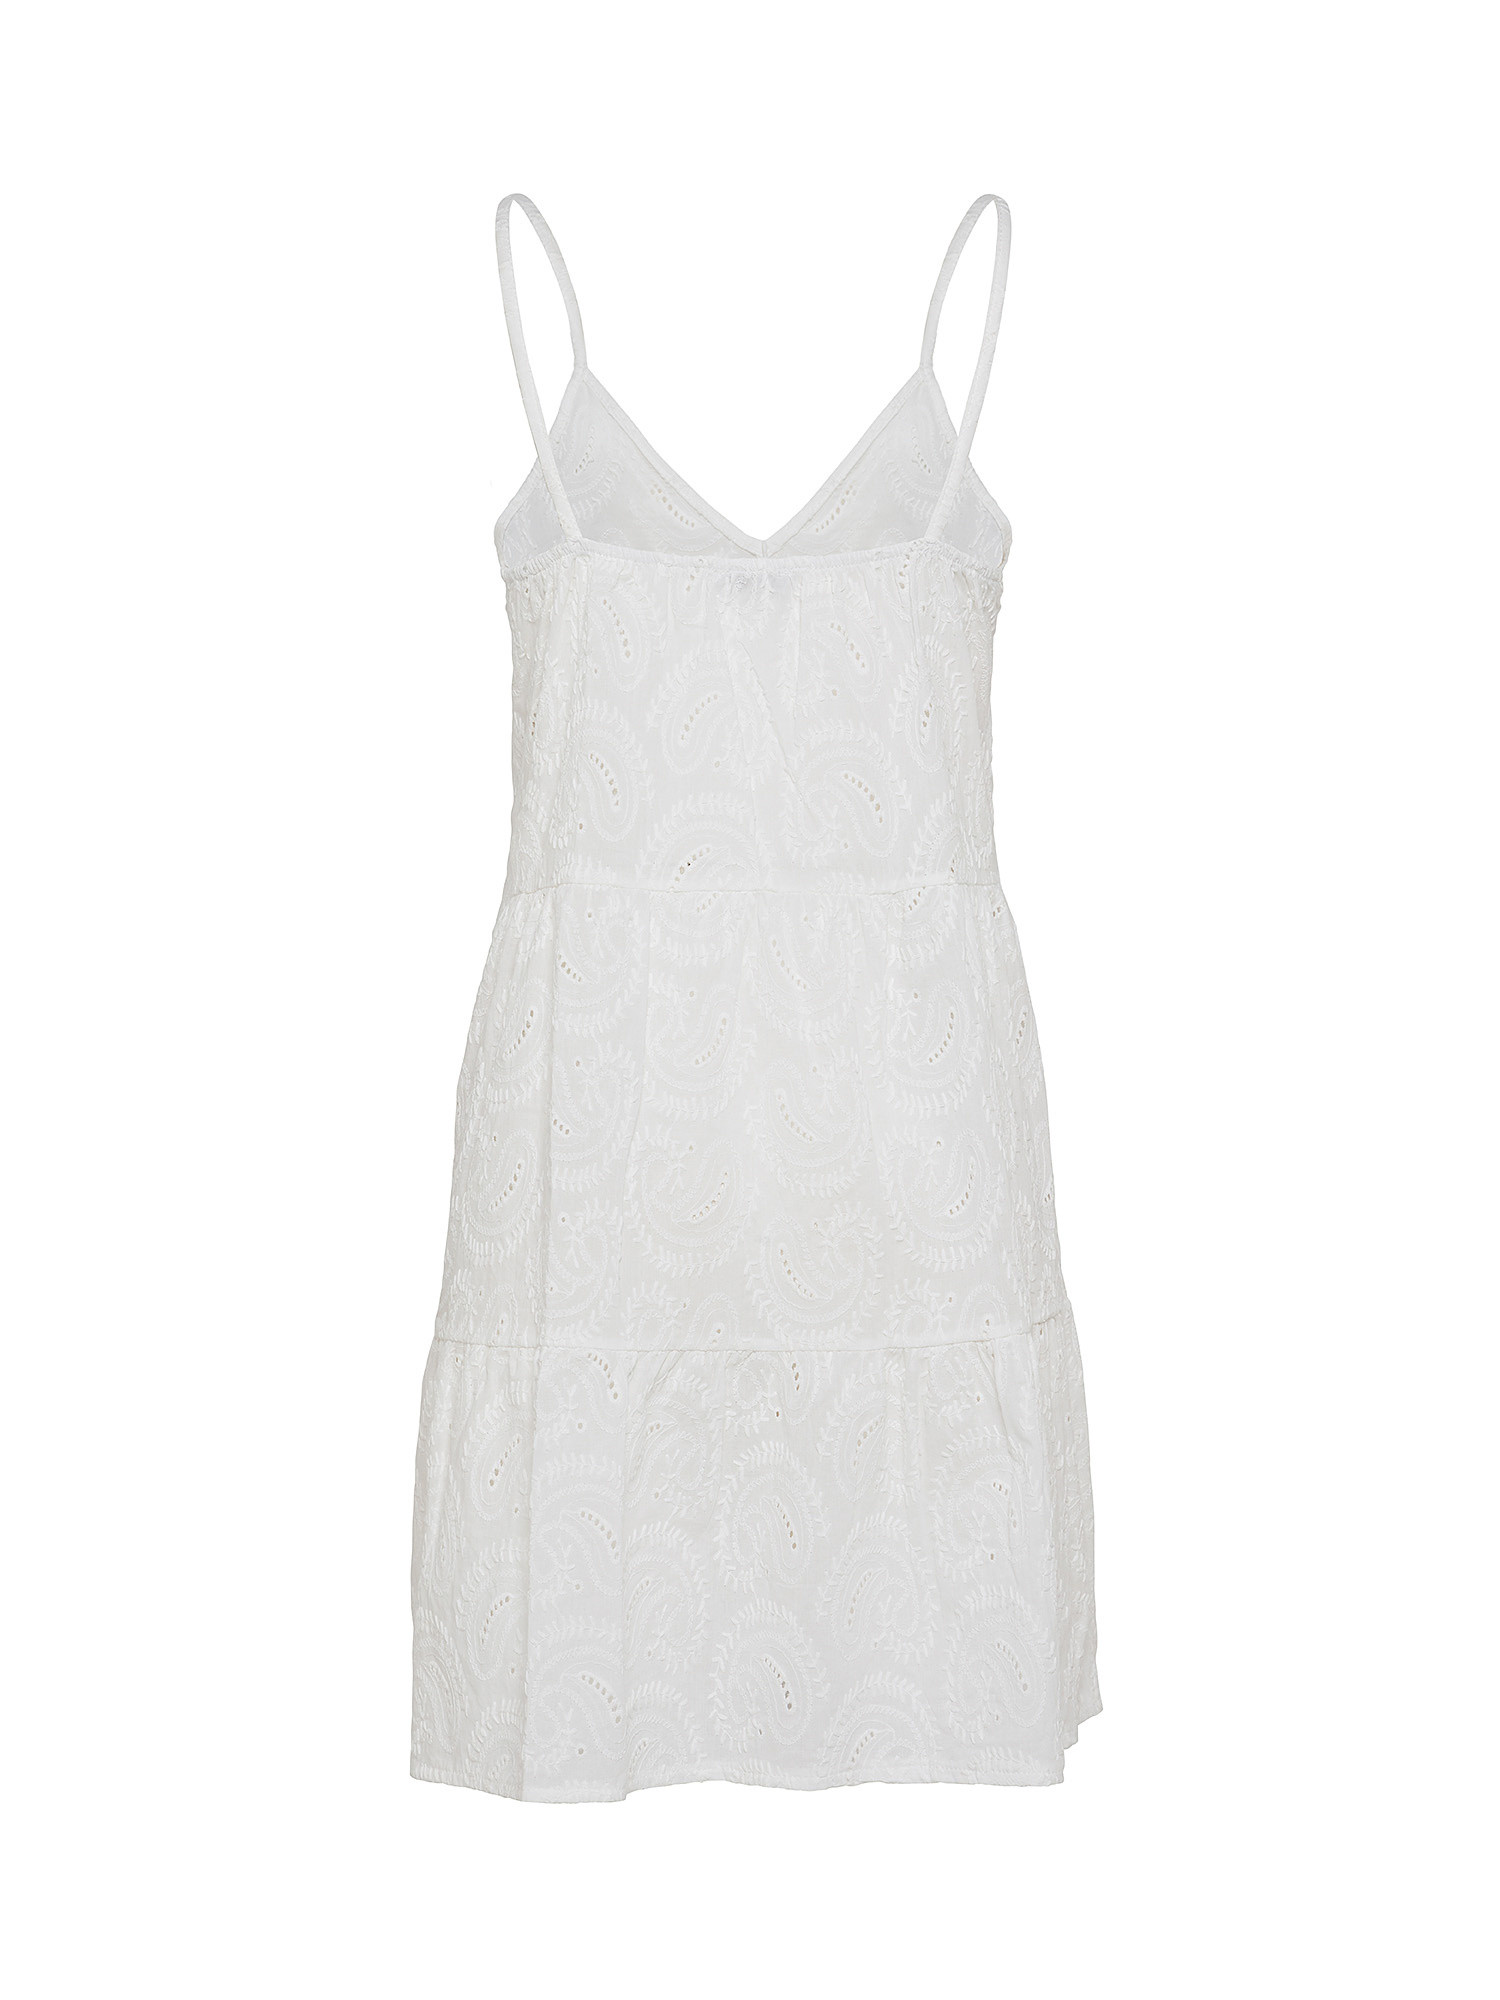 Solid color sangallo dress in cotton, White, large image number 1